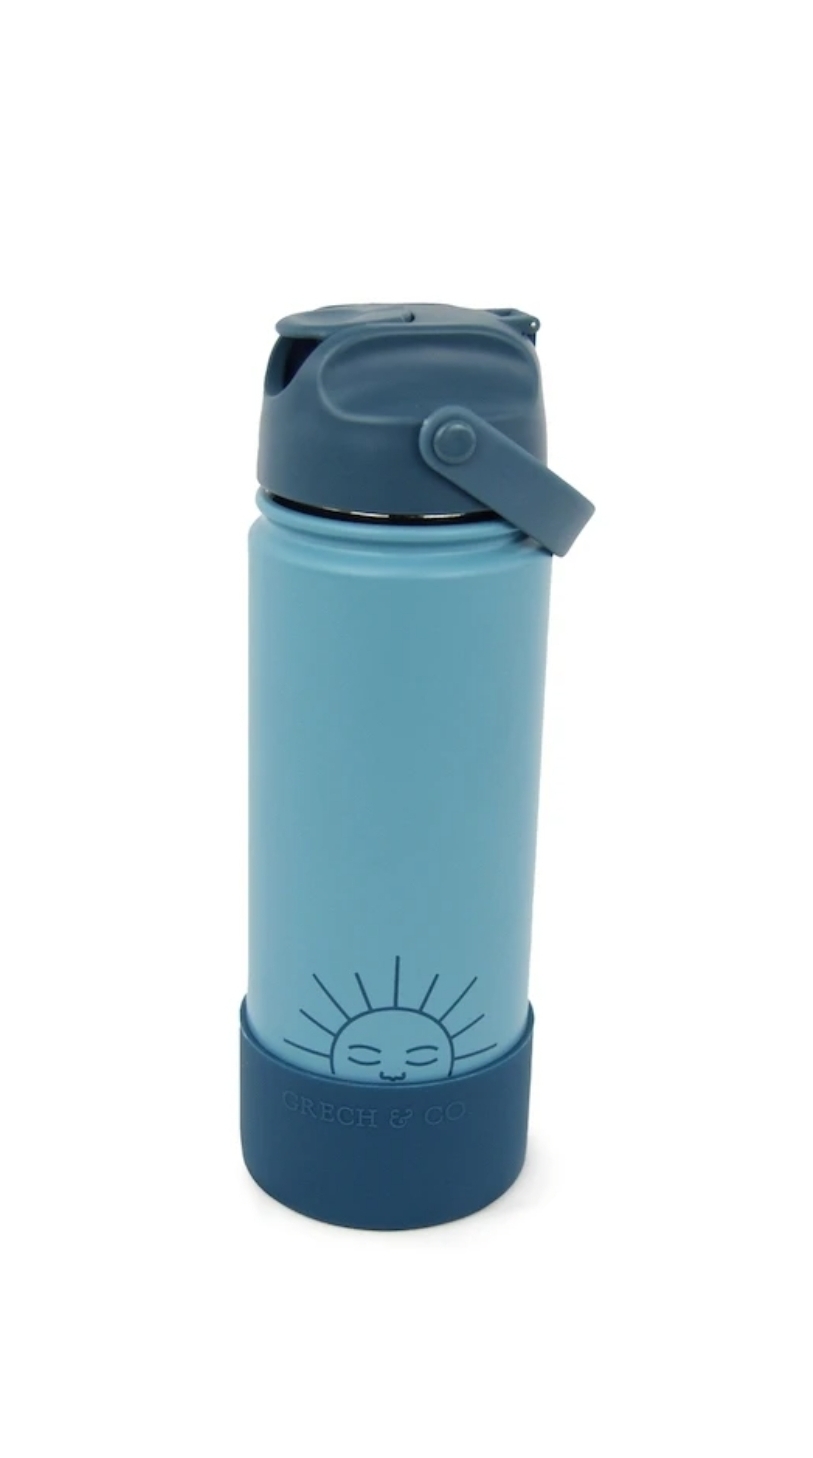 Mediterranean Food Thermos 600ml by Miniland – TeePee&Co